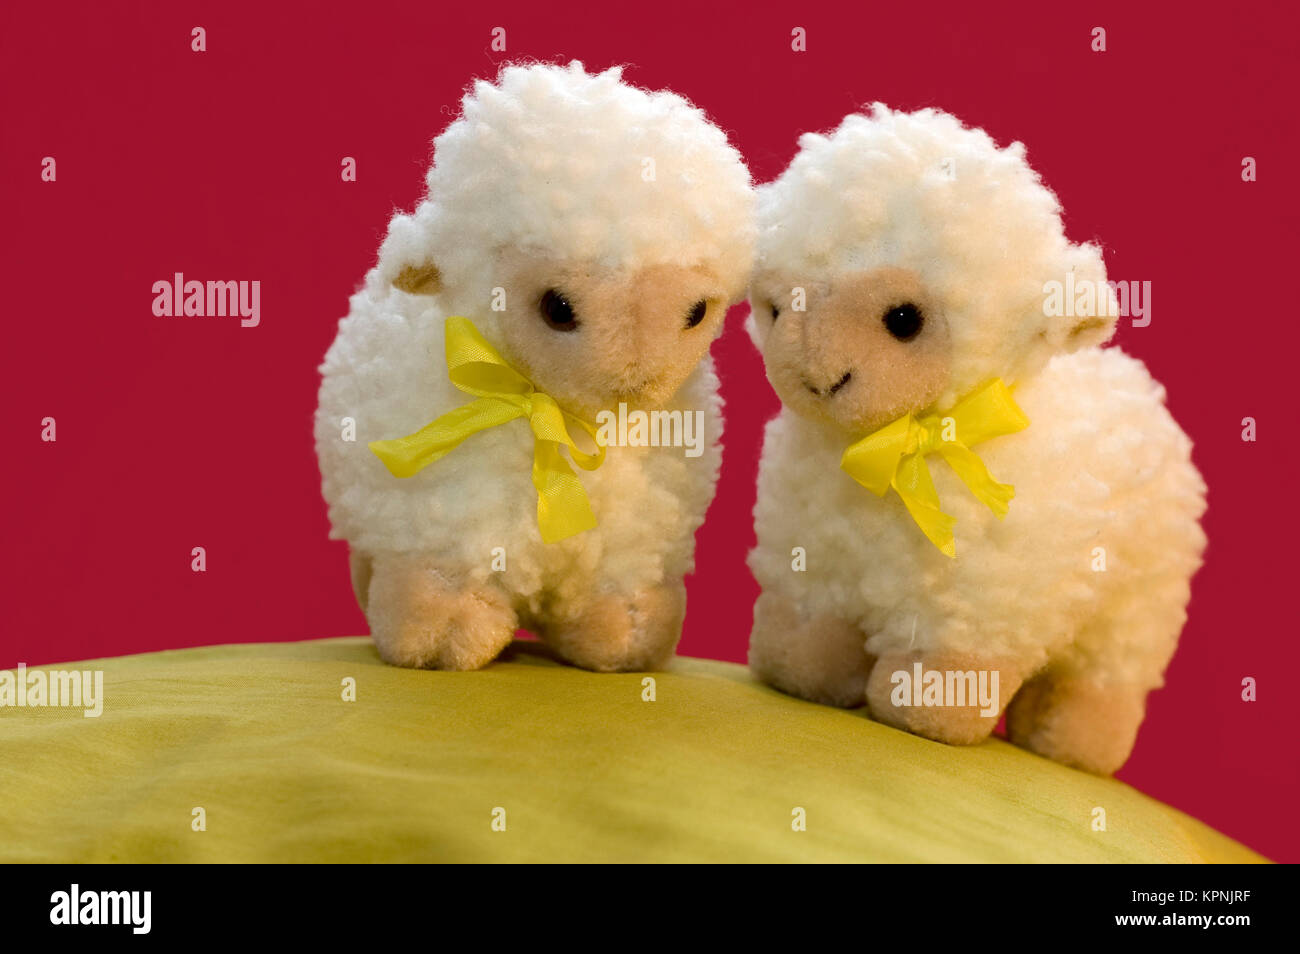 2 Toy Sheep In Spring Stock Photo